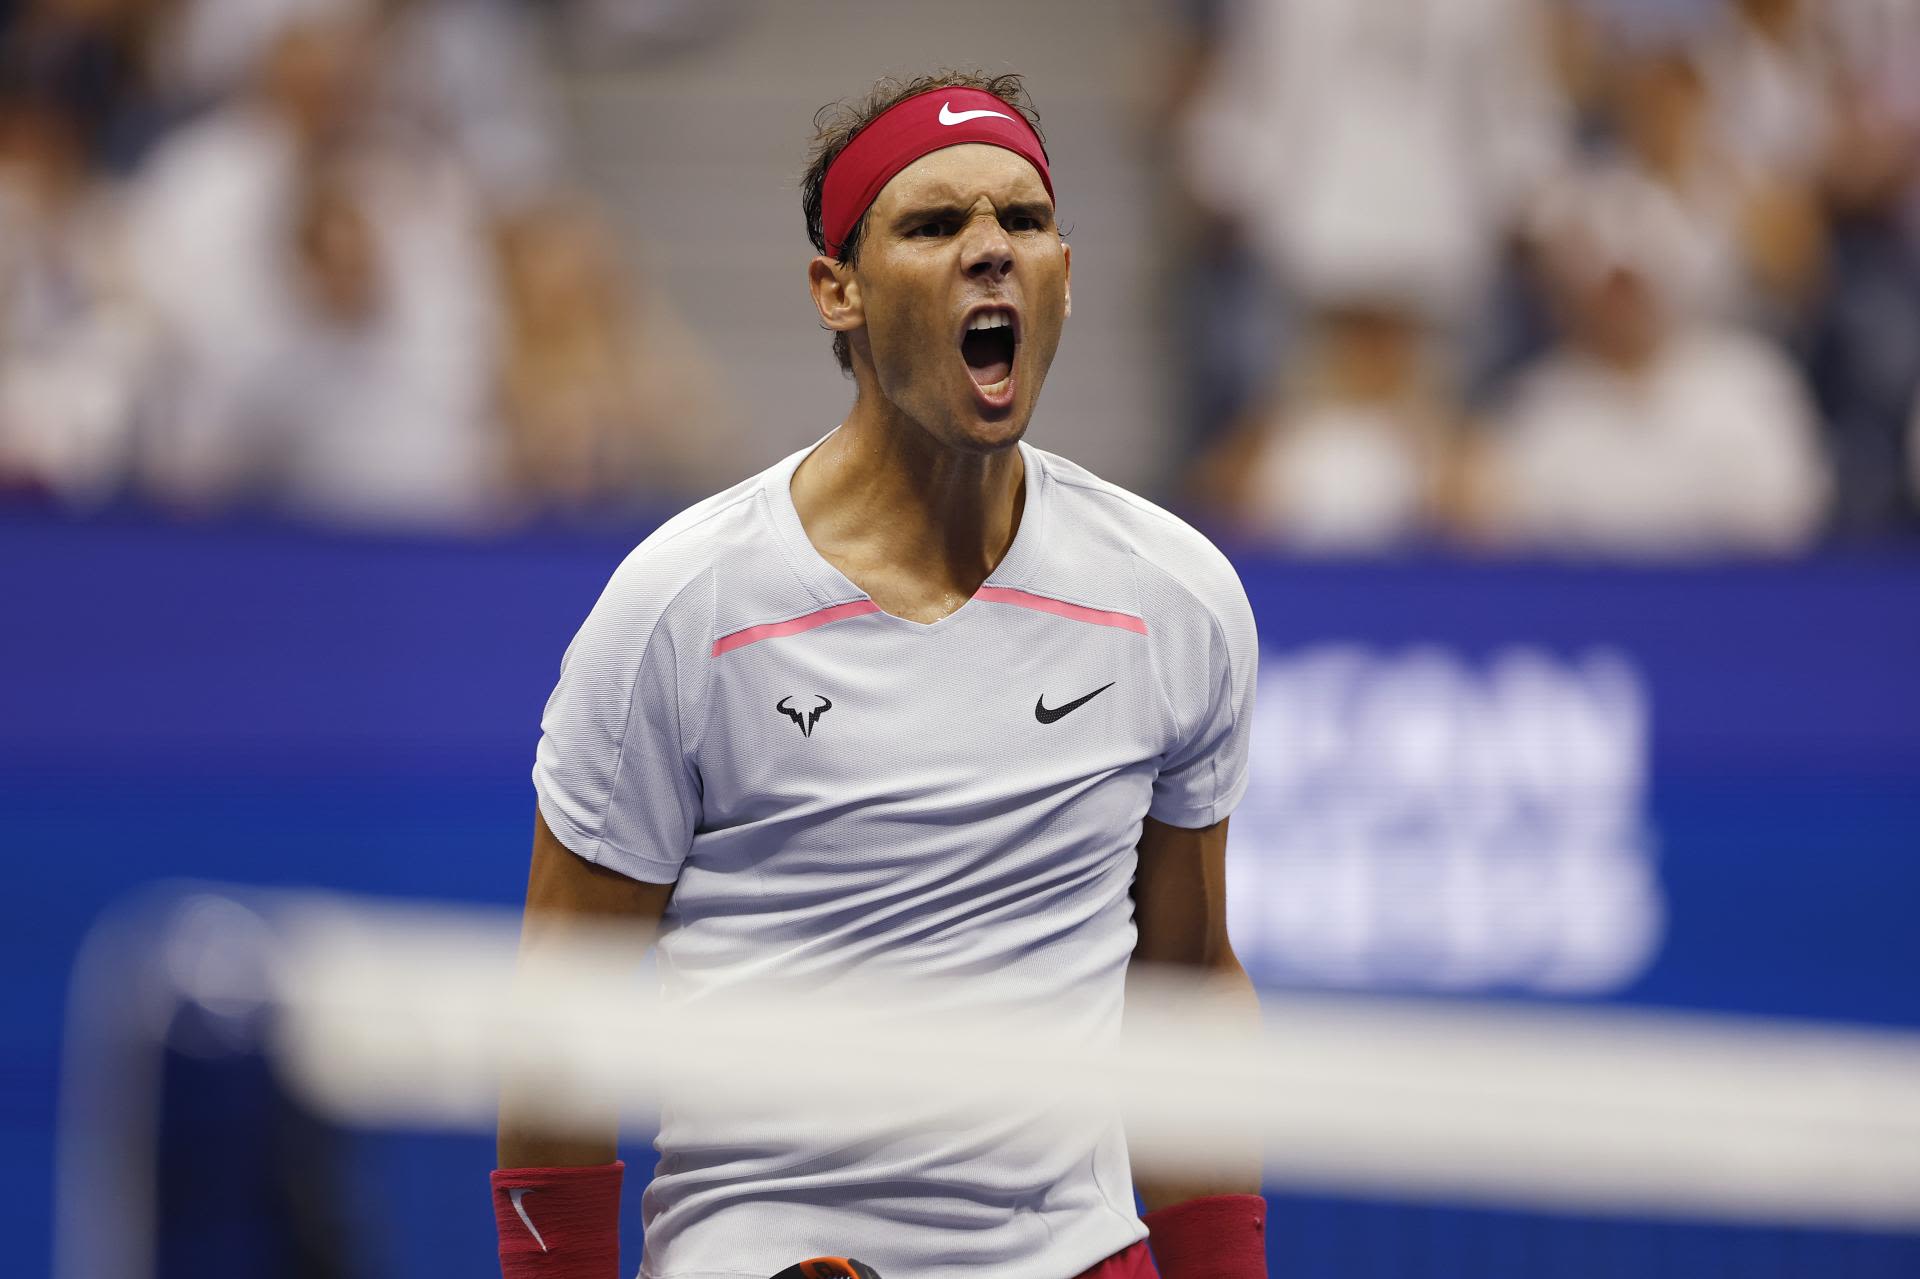 BREAKING: Rafael Nadal plans to play the US Open